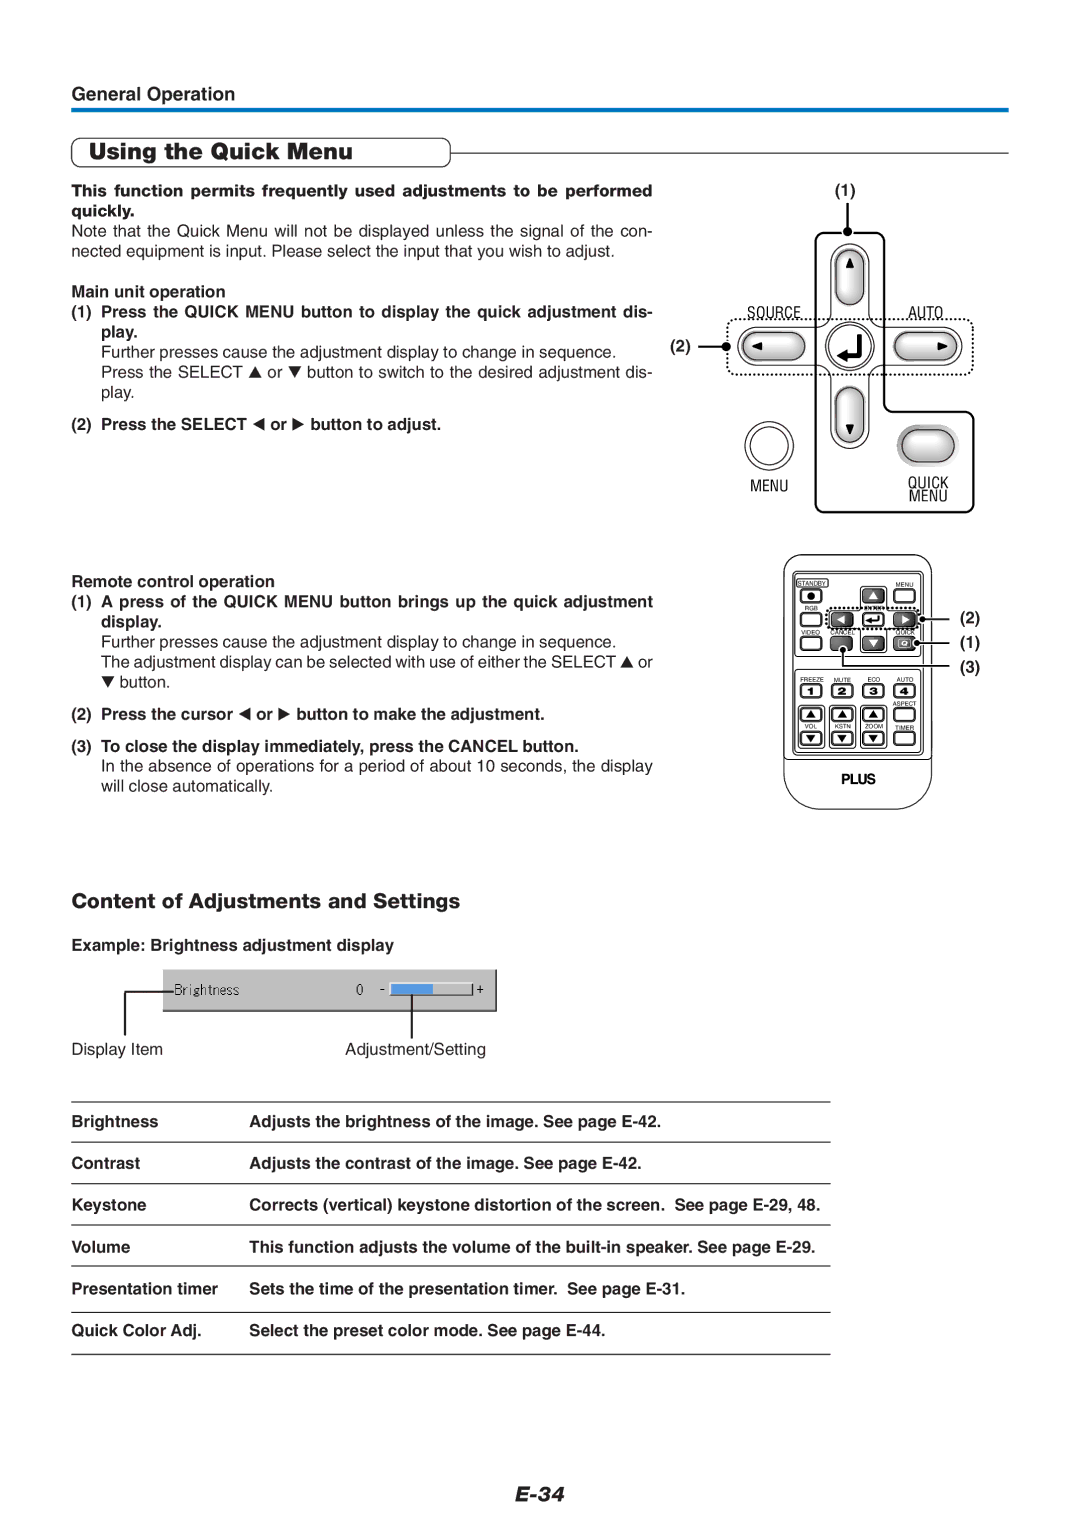 PLUS Vision U4-237 user manual Using the Quick Menu, Content of Adjustments and Settings 